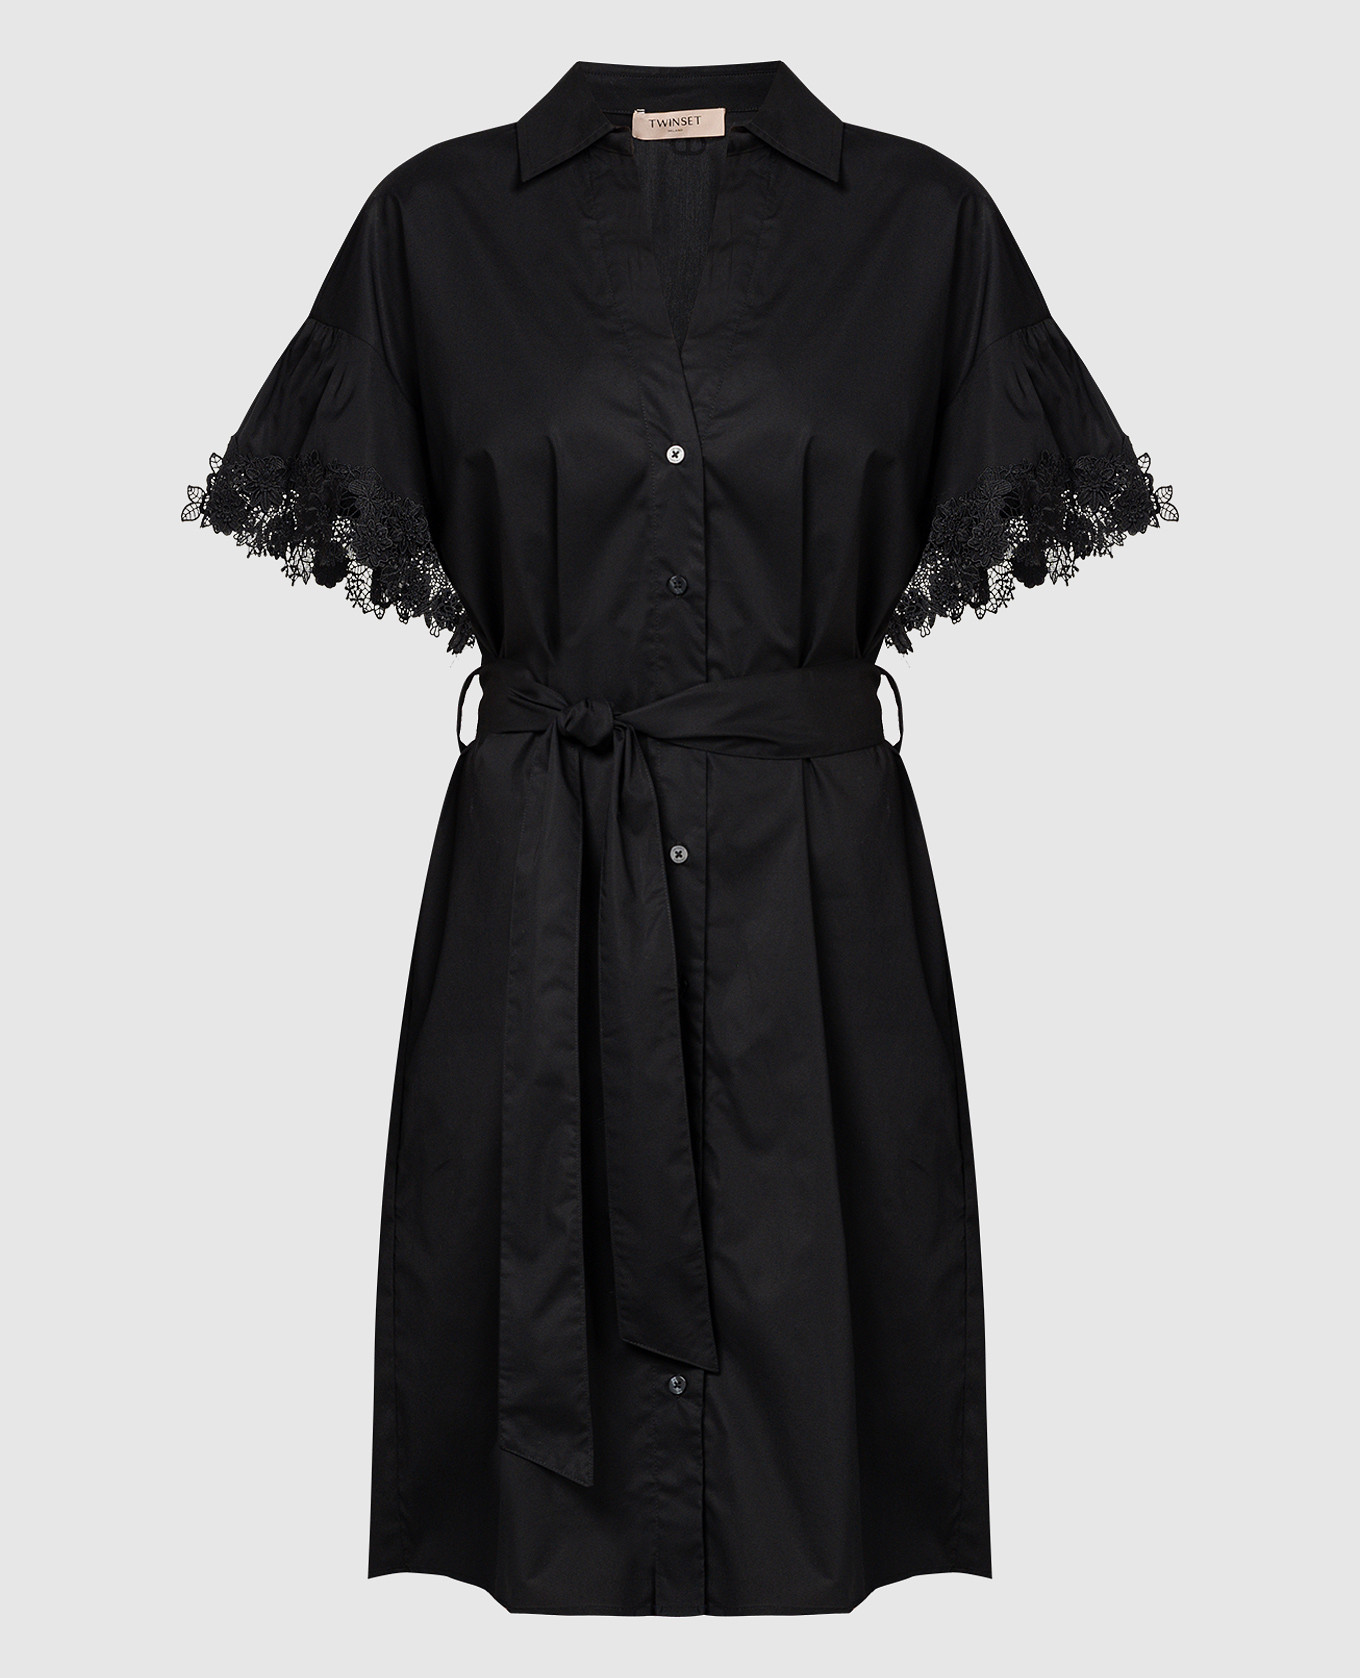 Black shirt dress with lace in the form of flowers